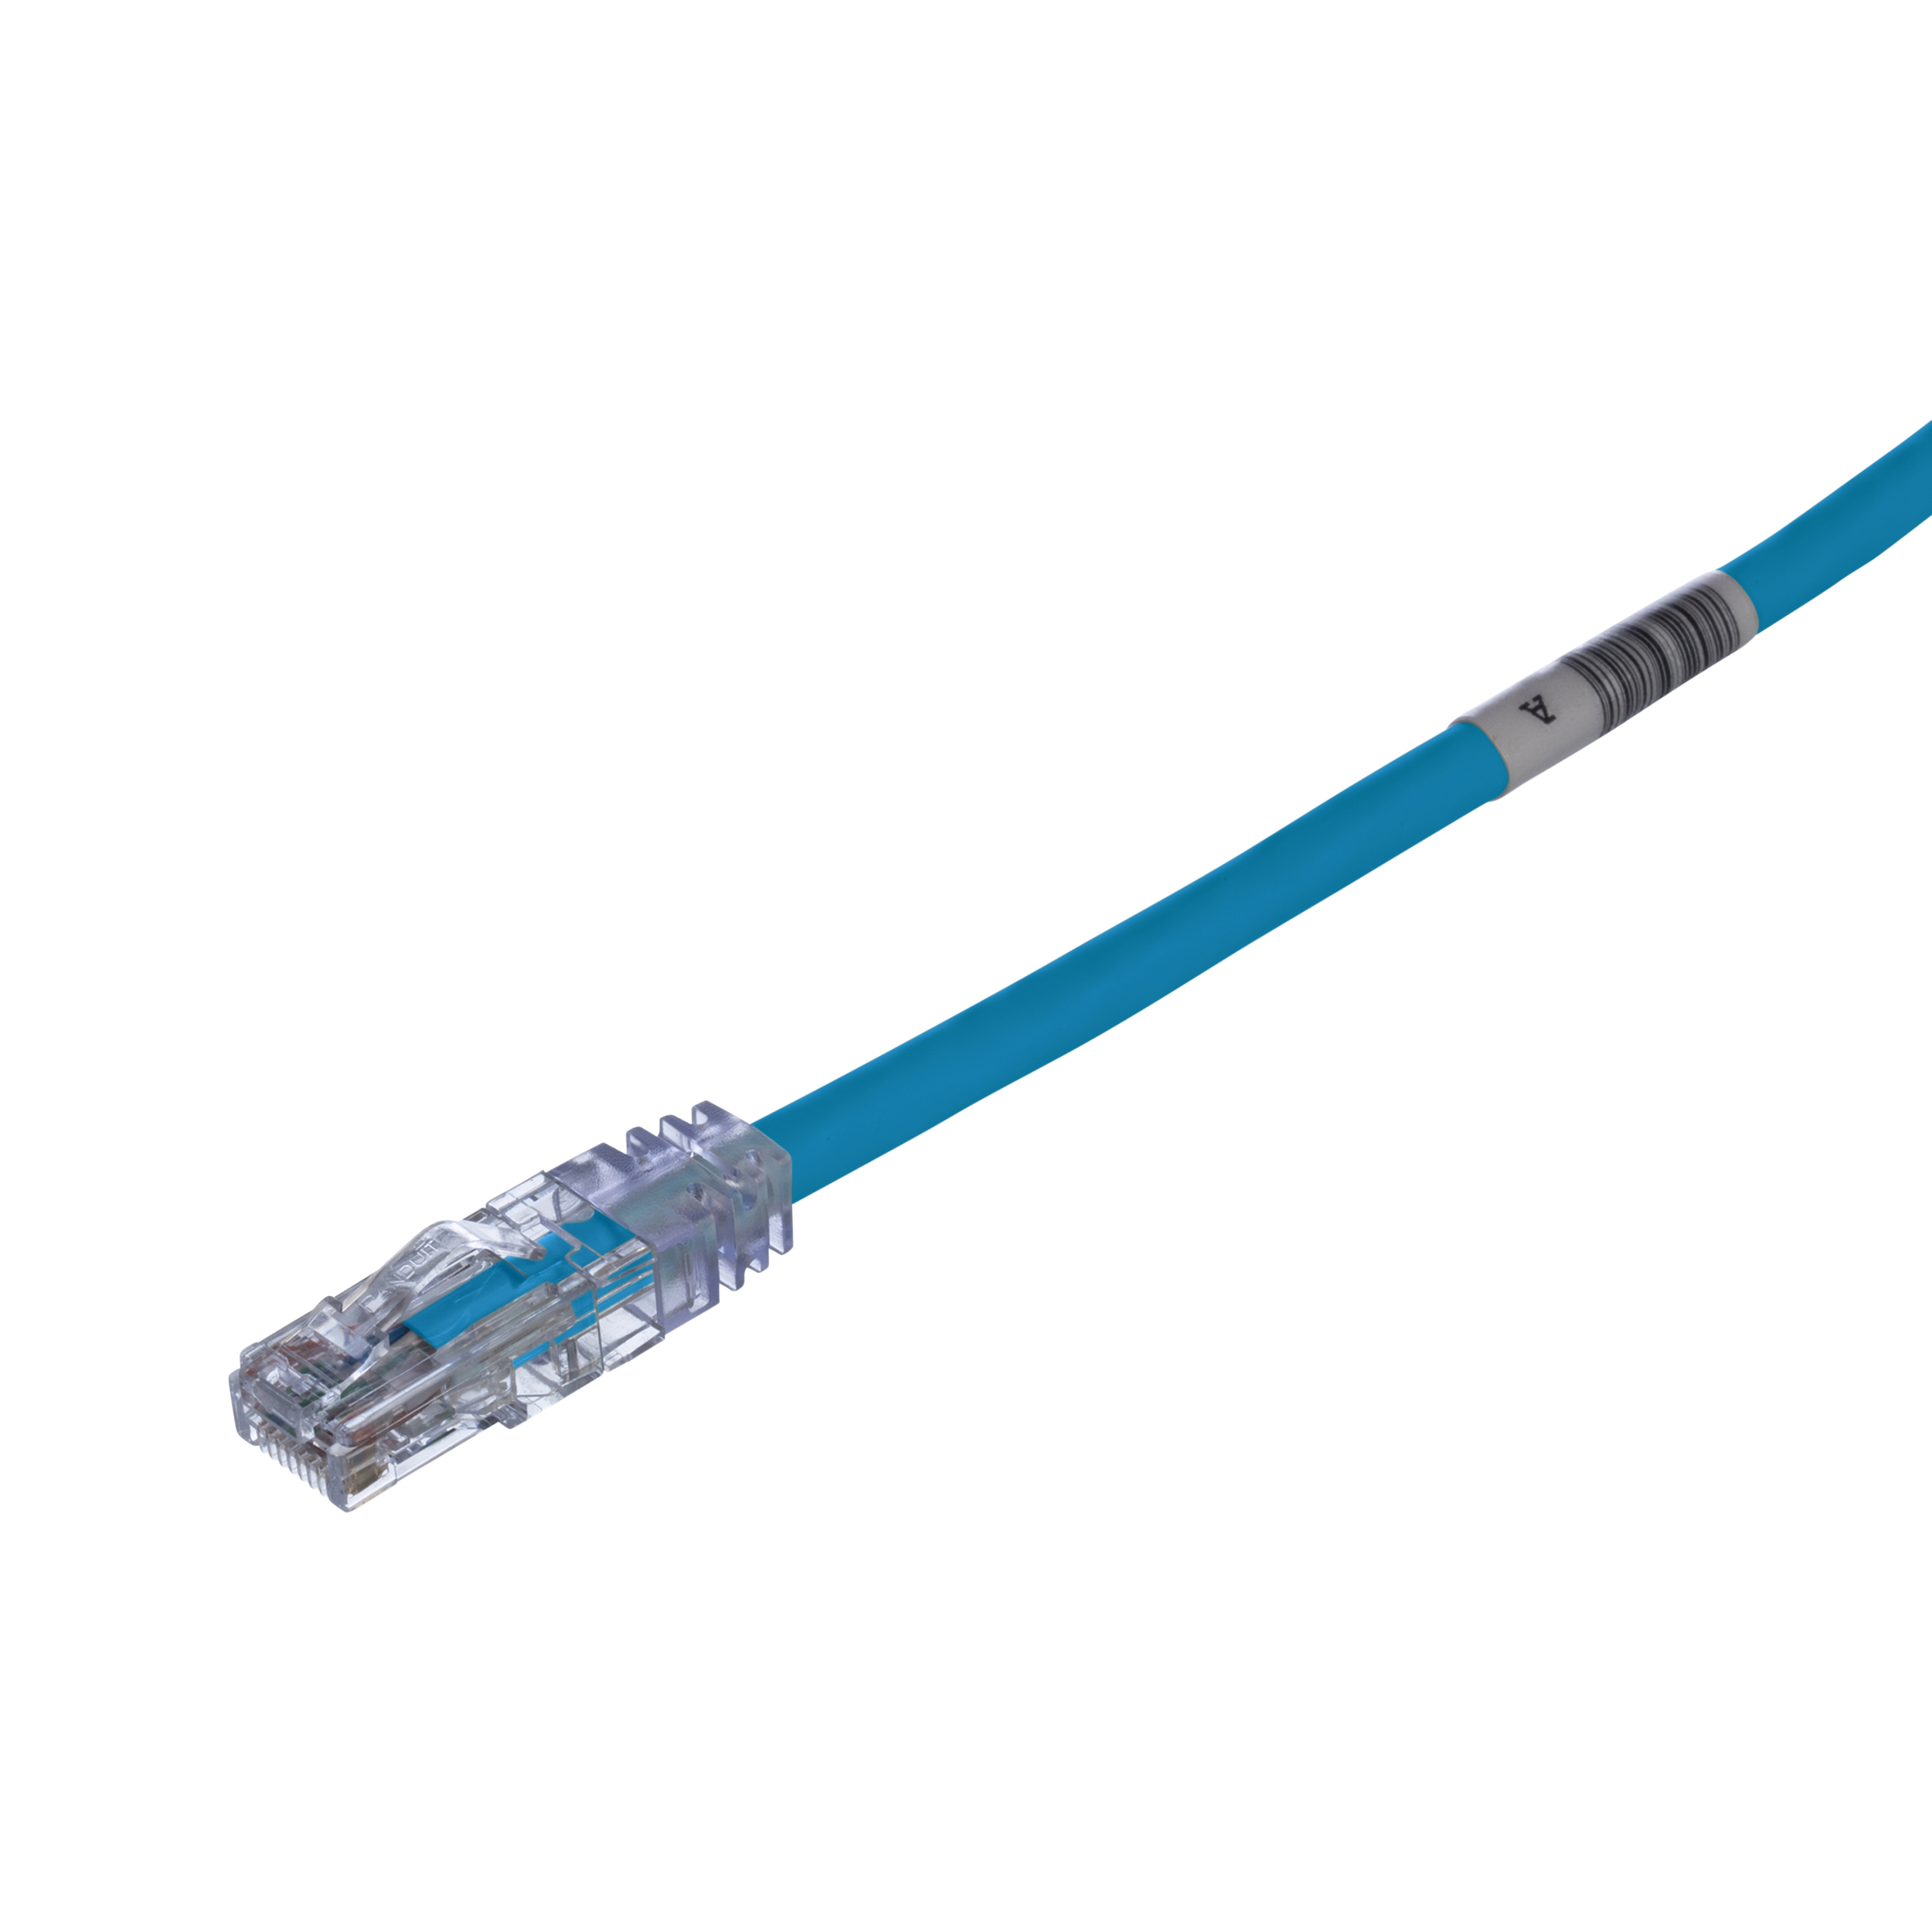 Cat 6 24 AWG UTP Copper Patch Cord, 0.5